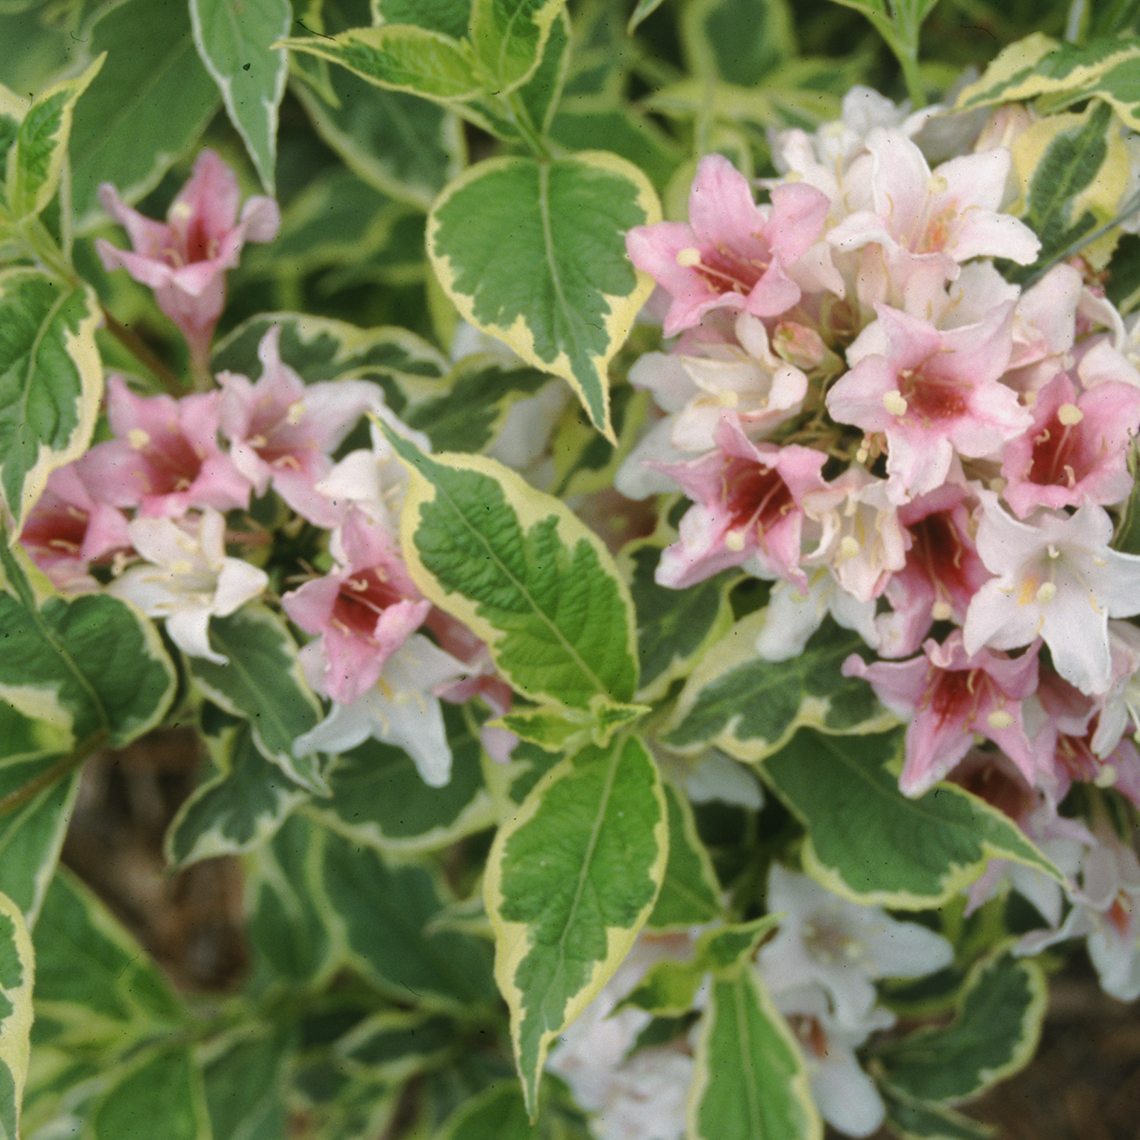 Gold Rush weigela has variegated green and ivory foliage and white and pink flowers